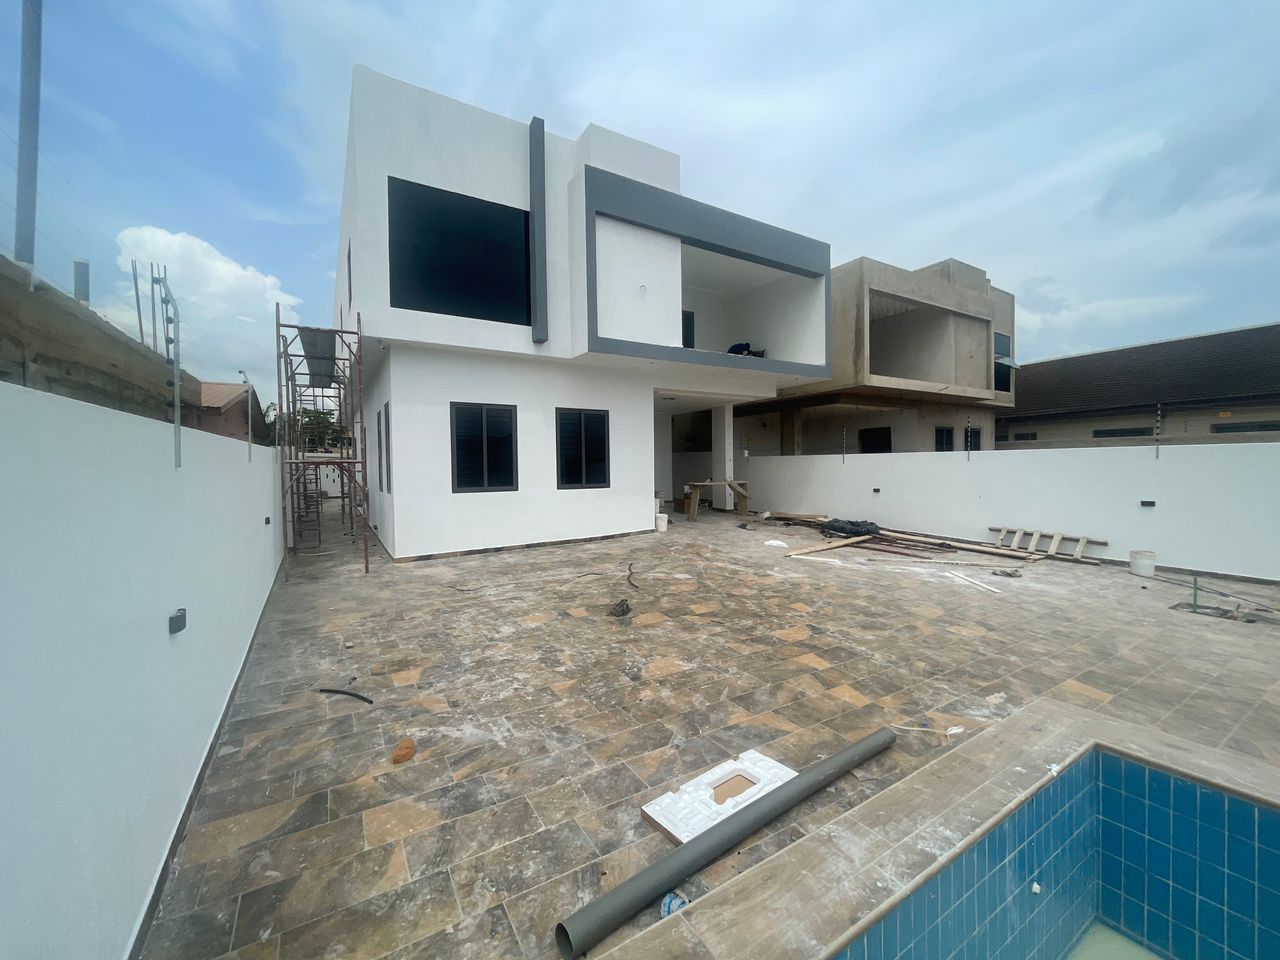 4 BEDROOM HOUSE FOR SALE AT ADENTA